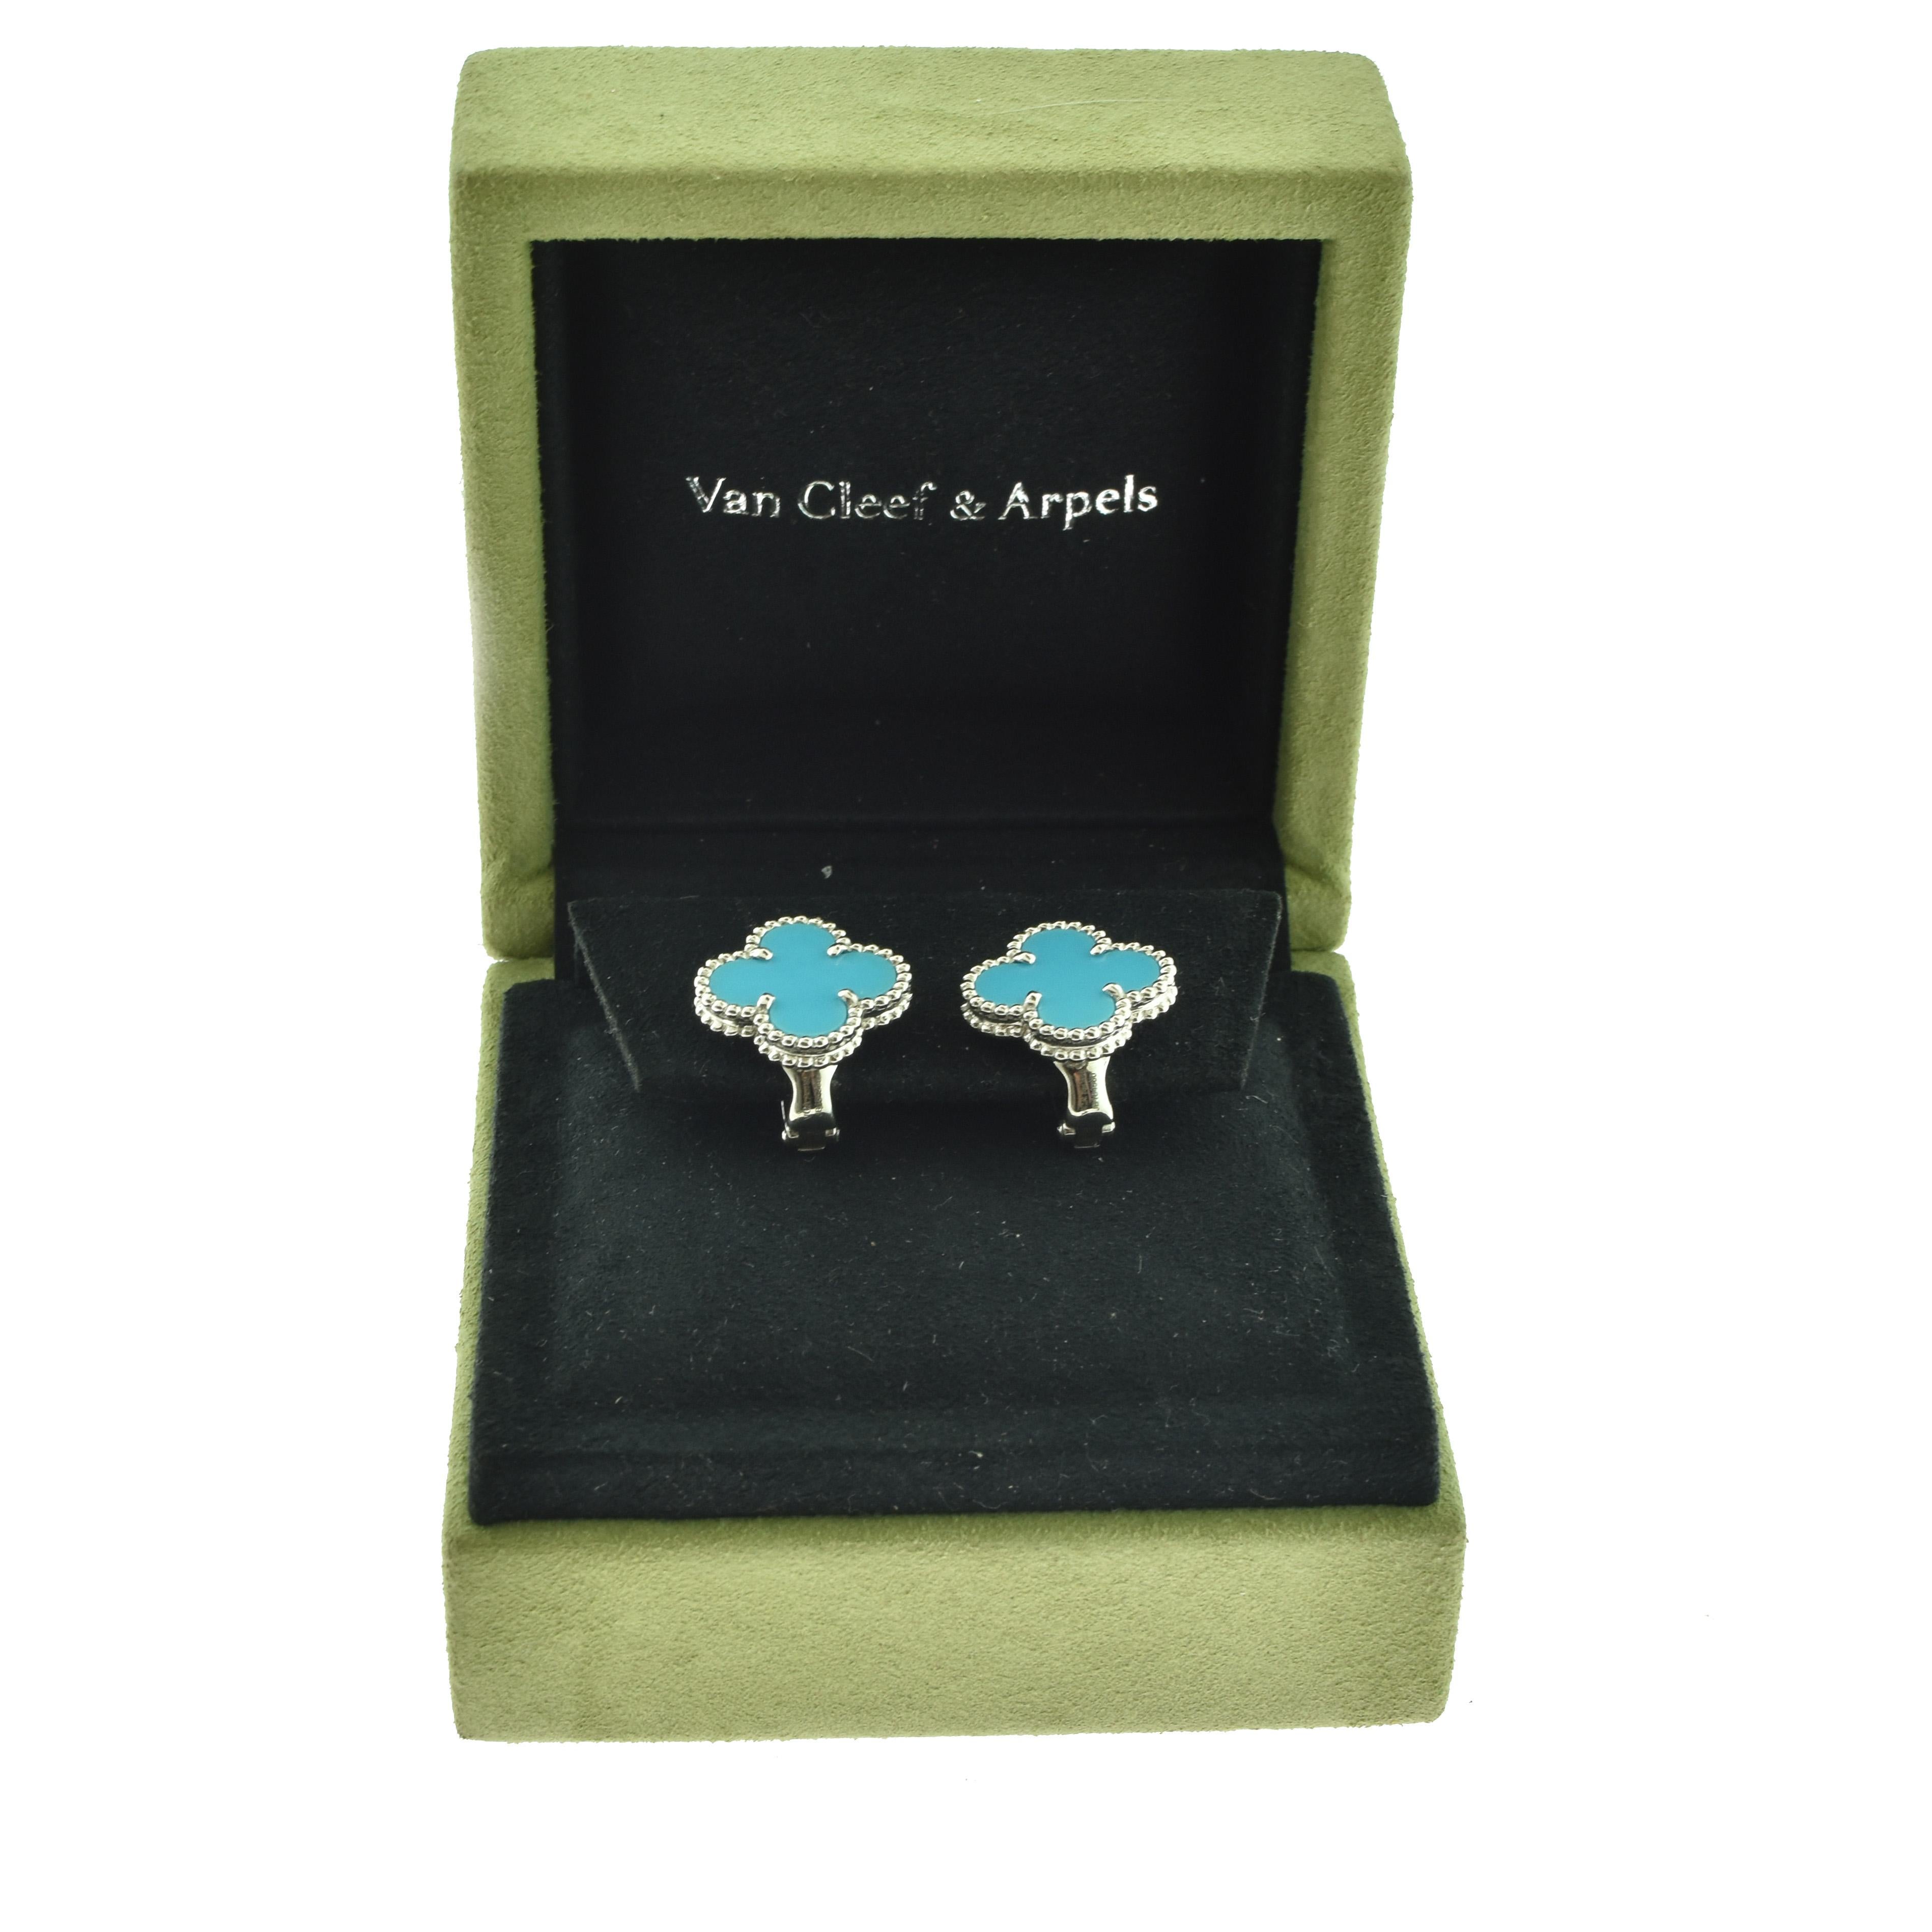 Designer: Van Cleef & Arpels

Collection: Vintage Alhambra

Style: 1 Motif Studs

Stones: Turquoise Onyx 

Metal Type: White Gold

Metal Purity: 18k

Total Item Weight (grams): 8.0

Earring Dimensions: 12.87 mm x 14.82 mm

Closure: Omega Post Backs